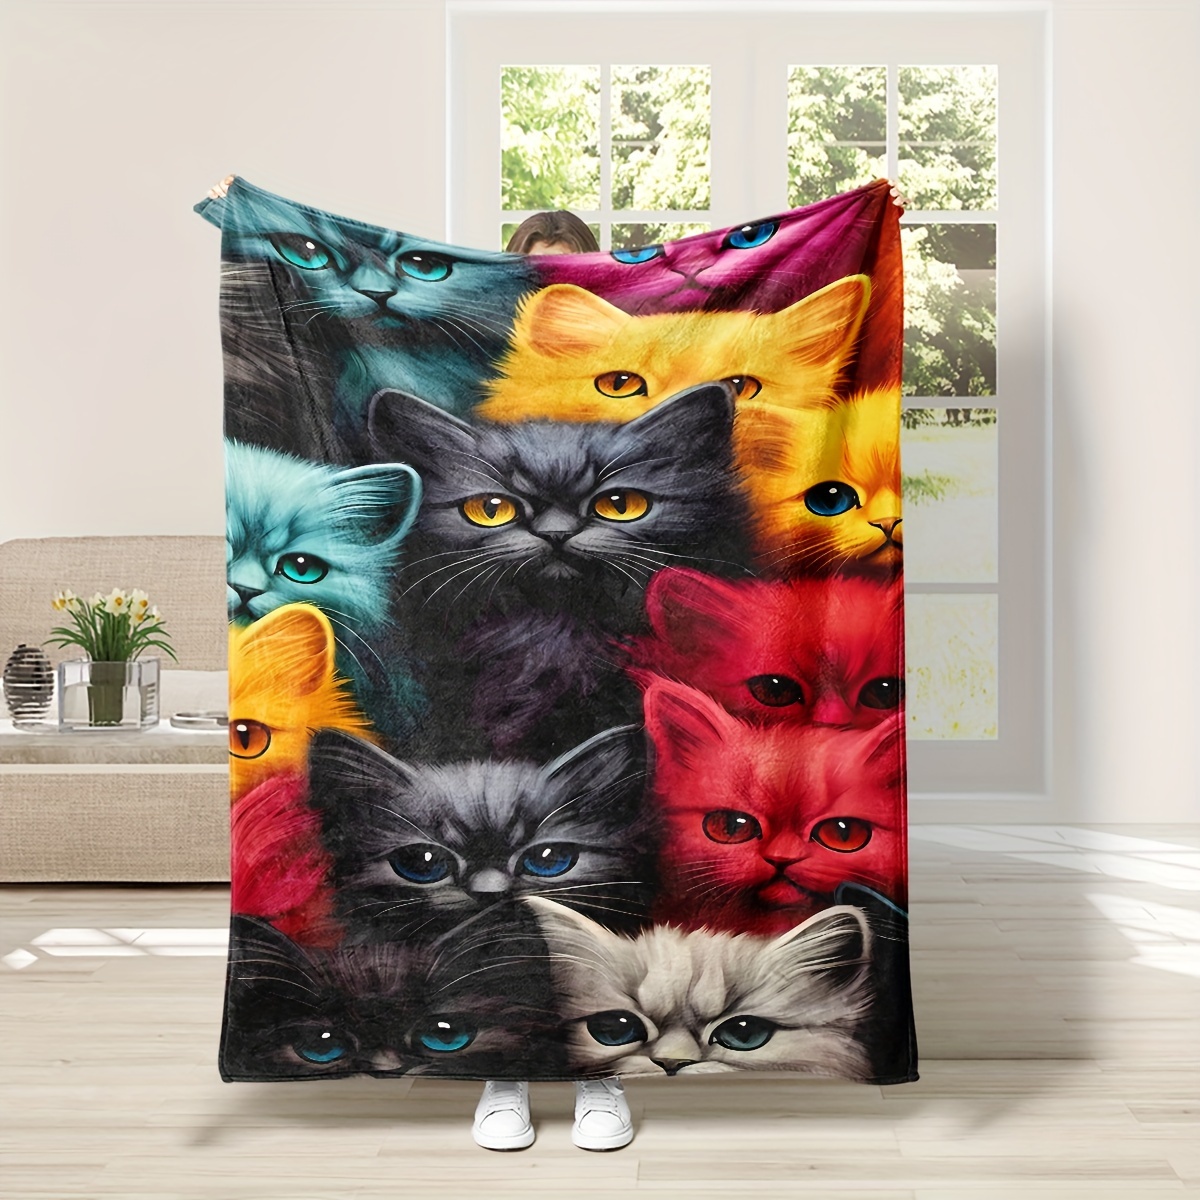 NEI-WAI Fire - Yellow Eyes - Black Cat Flannel Blanket, Seasons, Multiple,  Unique and Fashionable, Cozy and Warm, Adding Energy to Your Home, 76x100CM